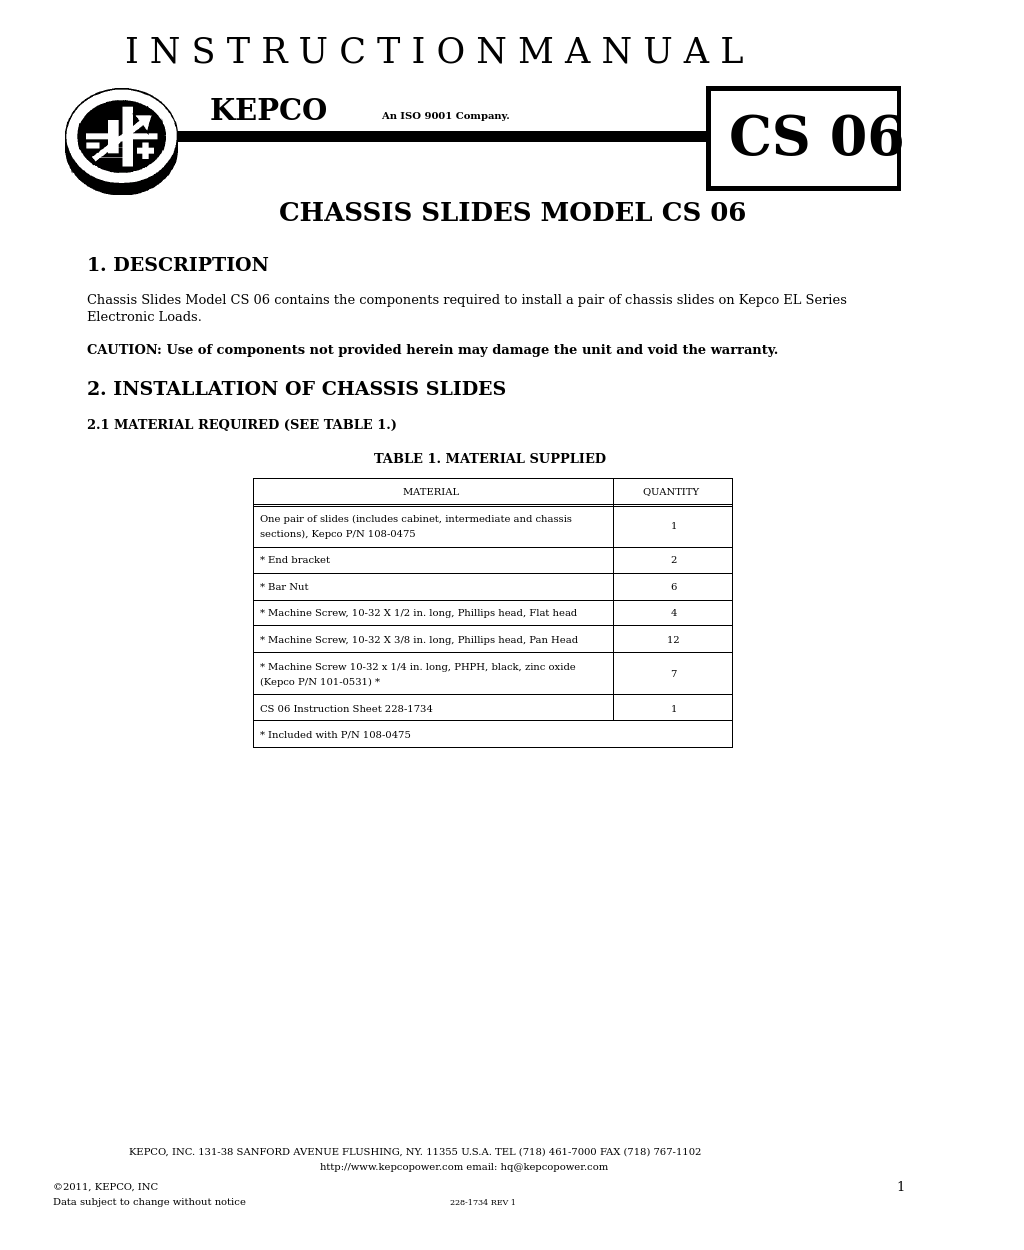 CS 06 Chassis Slides (for EL Series Electronic Load)